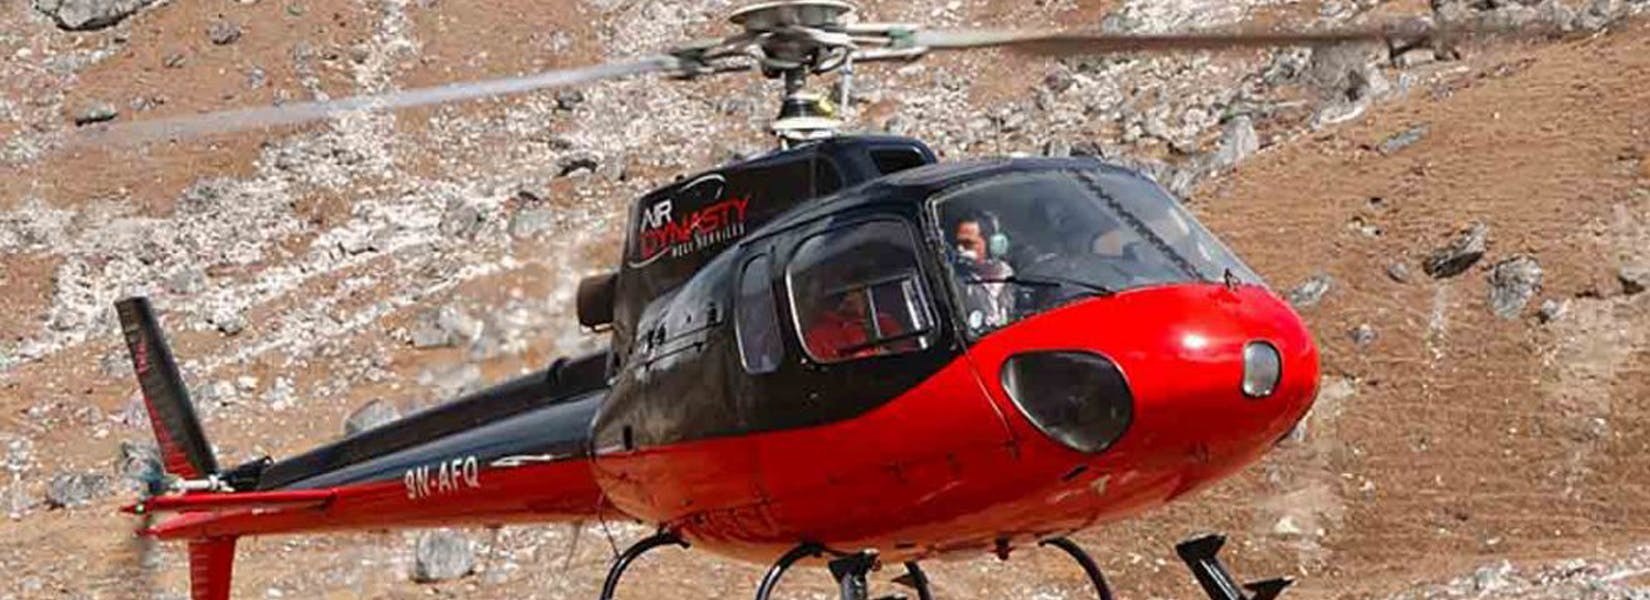 Upper Mustang Lomanthang Helicopter Tour - <span class="font-light">1 days</span>